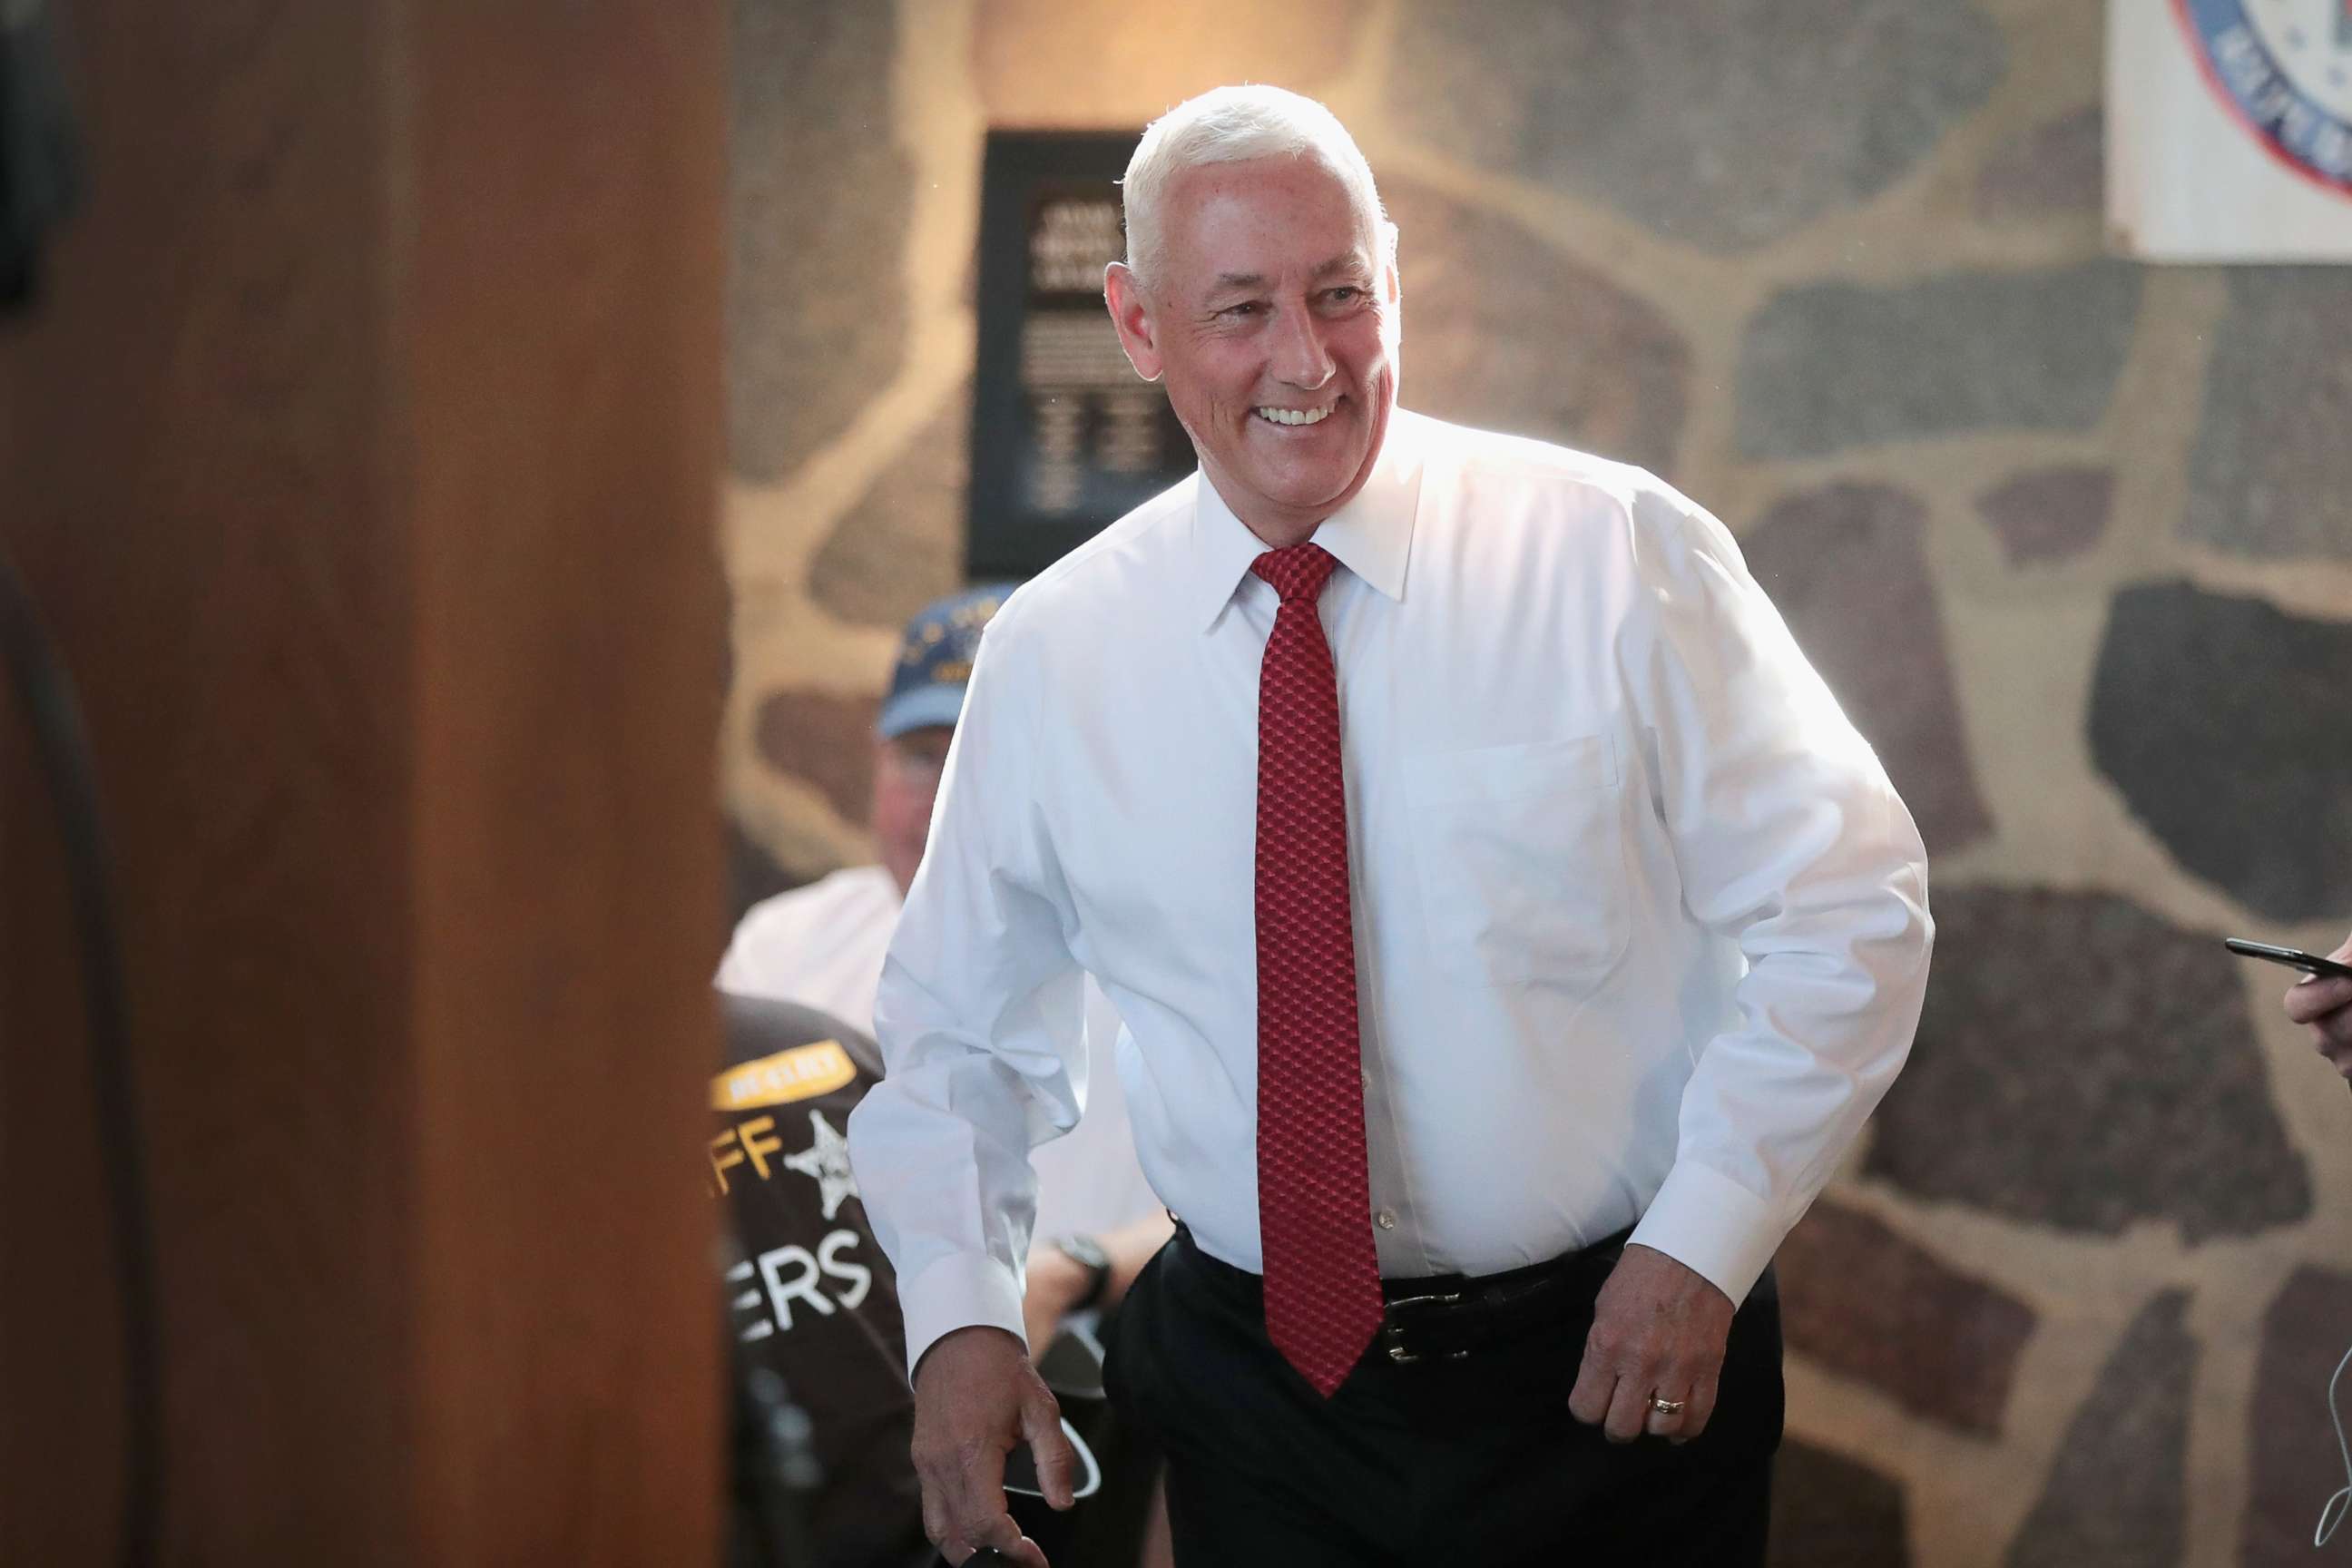 PHOTO: Greg Pence, Republican candidate for the U.S. House of Representatives, arrives at a primary-night watch party, May 8, 2018 in Columbus, Indiana. Pence is the older brother of Vice President Mike Pence.